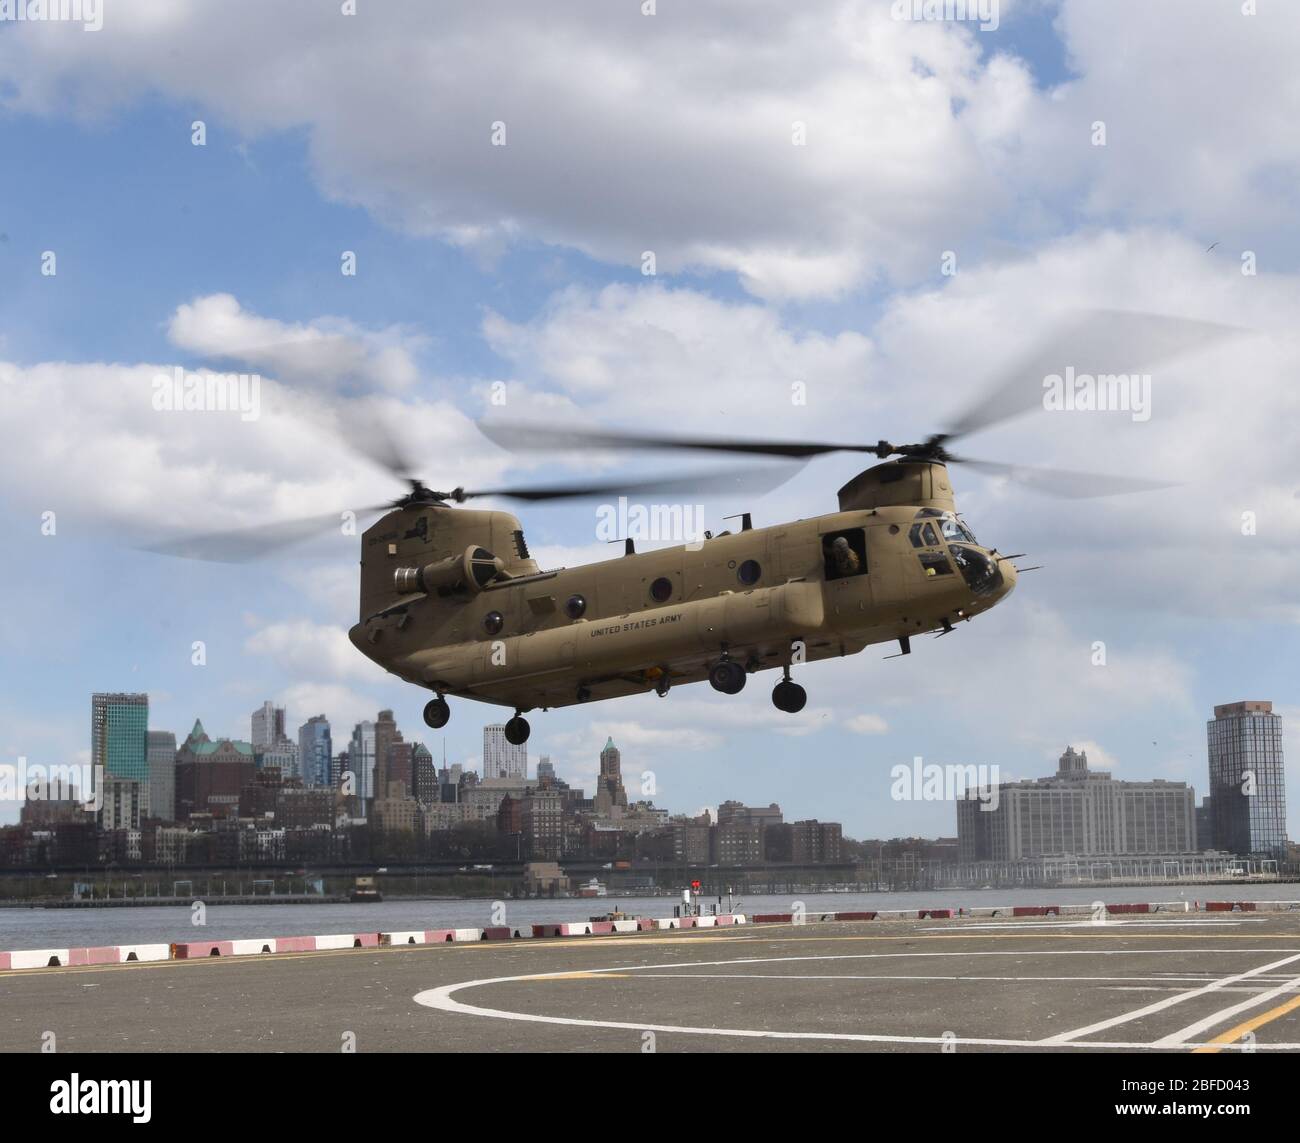 A CH-47 Chinook helicopter, assigned to the New York Army National Guard's Company B, 3rd Battalion, 126th Aviation, approaches a helipad in New York City, April 16, 2020. New York National Guard members are supporting the multi-agency response to COVID-19. (U.S. Air National Guard photo by Senior Airman Sean Madden) Stock Photo